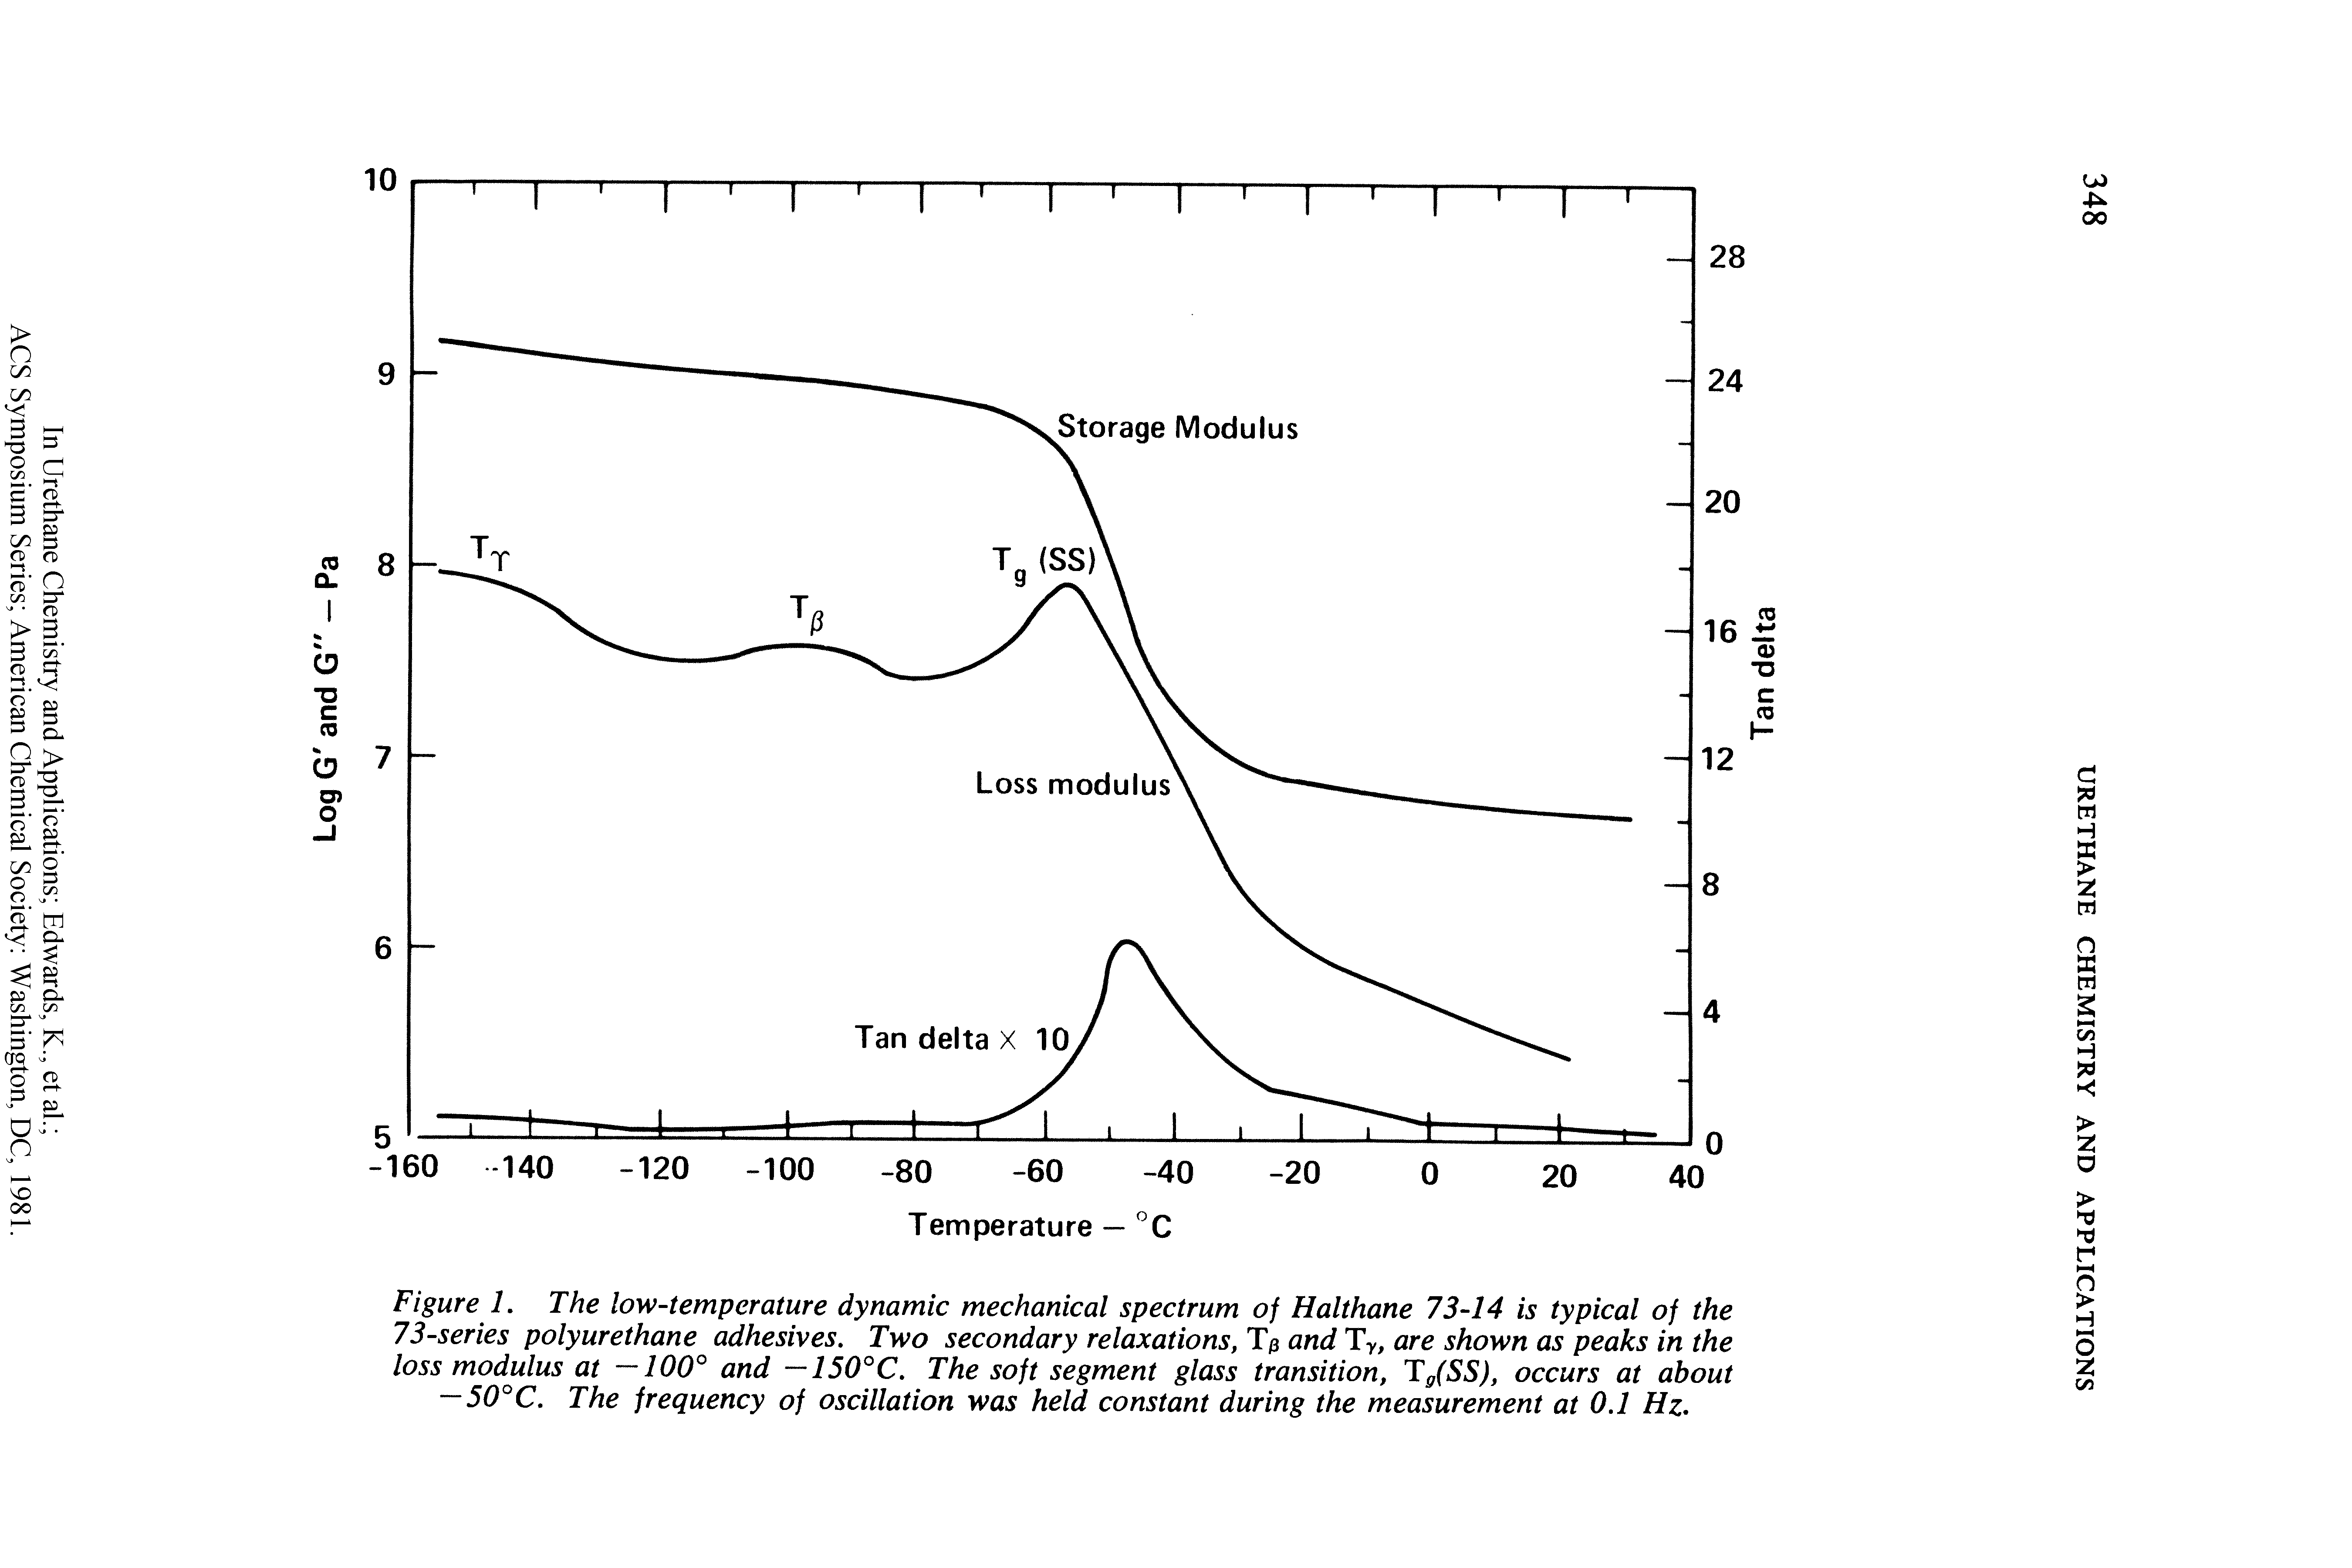 Figure L The low-temperature dynamic mechanical spectrum of Halthane 73-14 is typical of the 73-series polyurethane adhesives. Two secondary relaxations, Tp and Ty, are shown as peaks in the loss modulus at —100° and —150°C. The soft segment glass transition, Tg(SS), occurs at about —50°C. The frequency of oscillation was held constant during the measurement at 0.1 Hz.